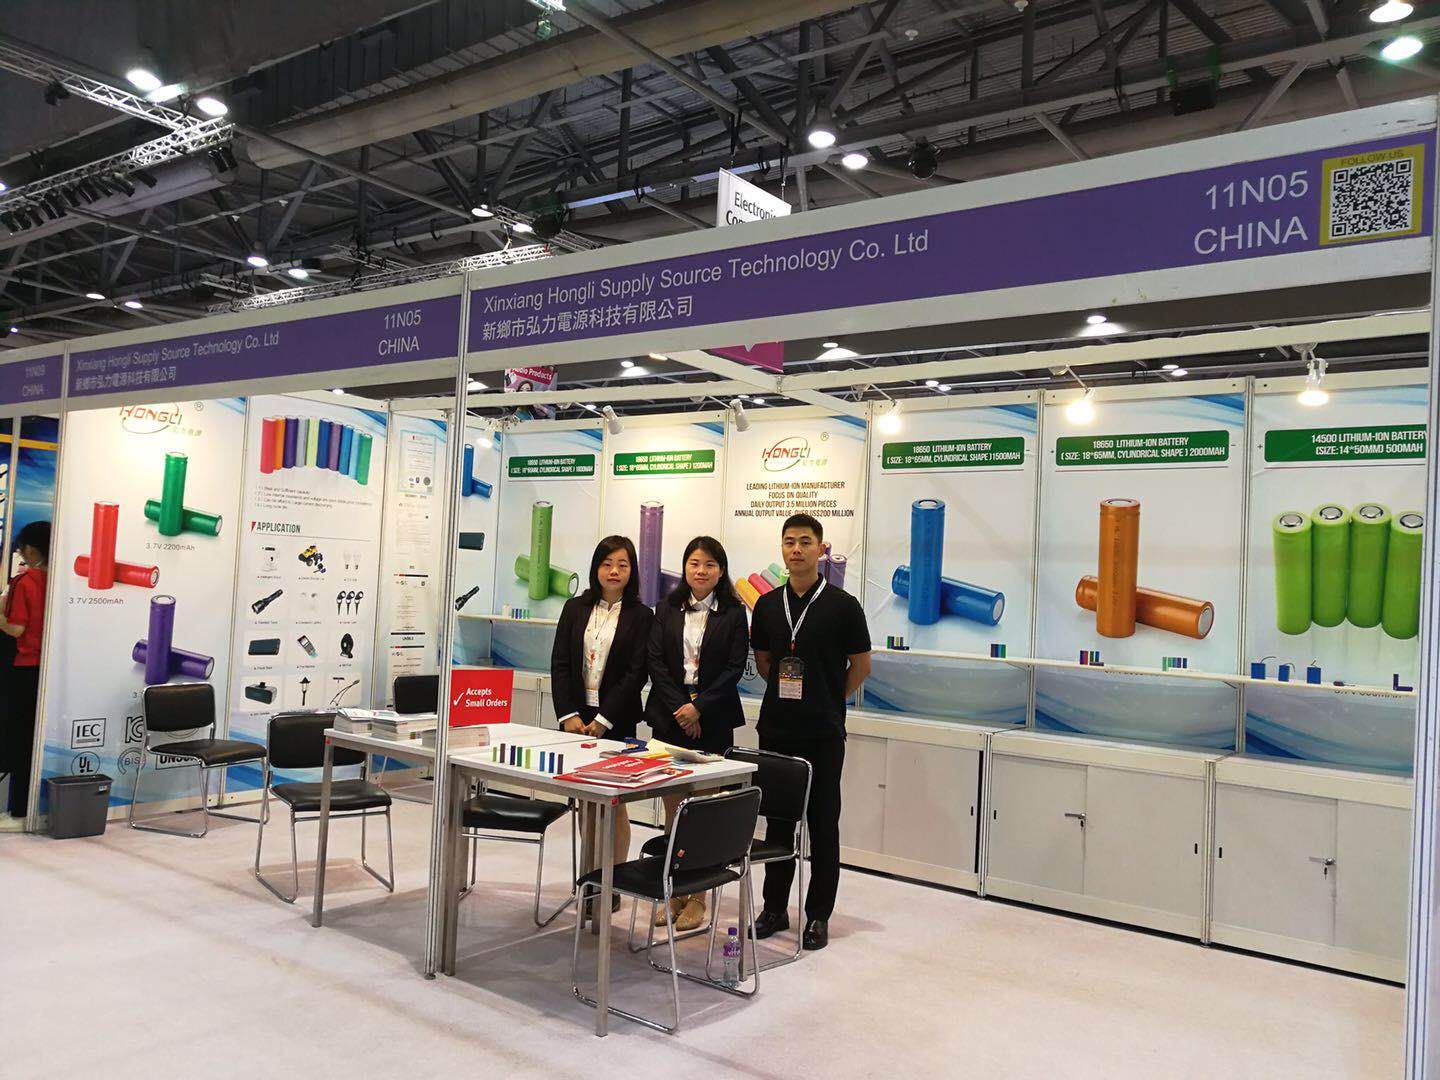 Global Sources Electronic Components Show (from 11-14th April).our booth no#: 11N05